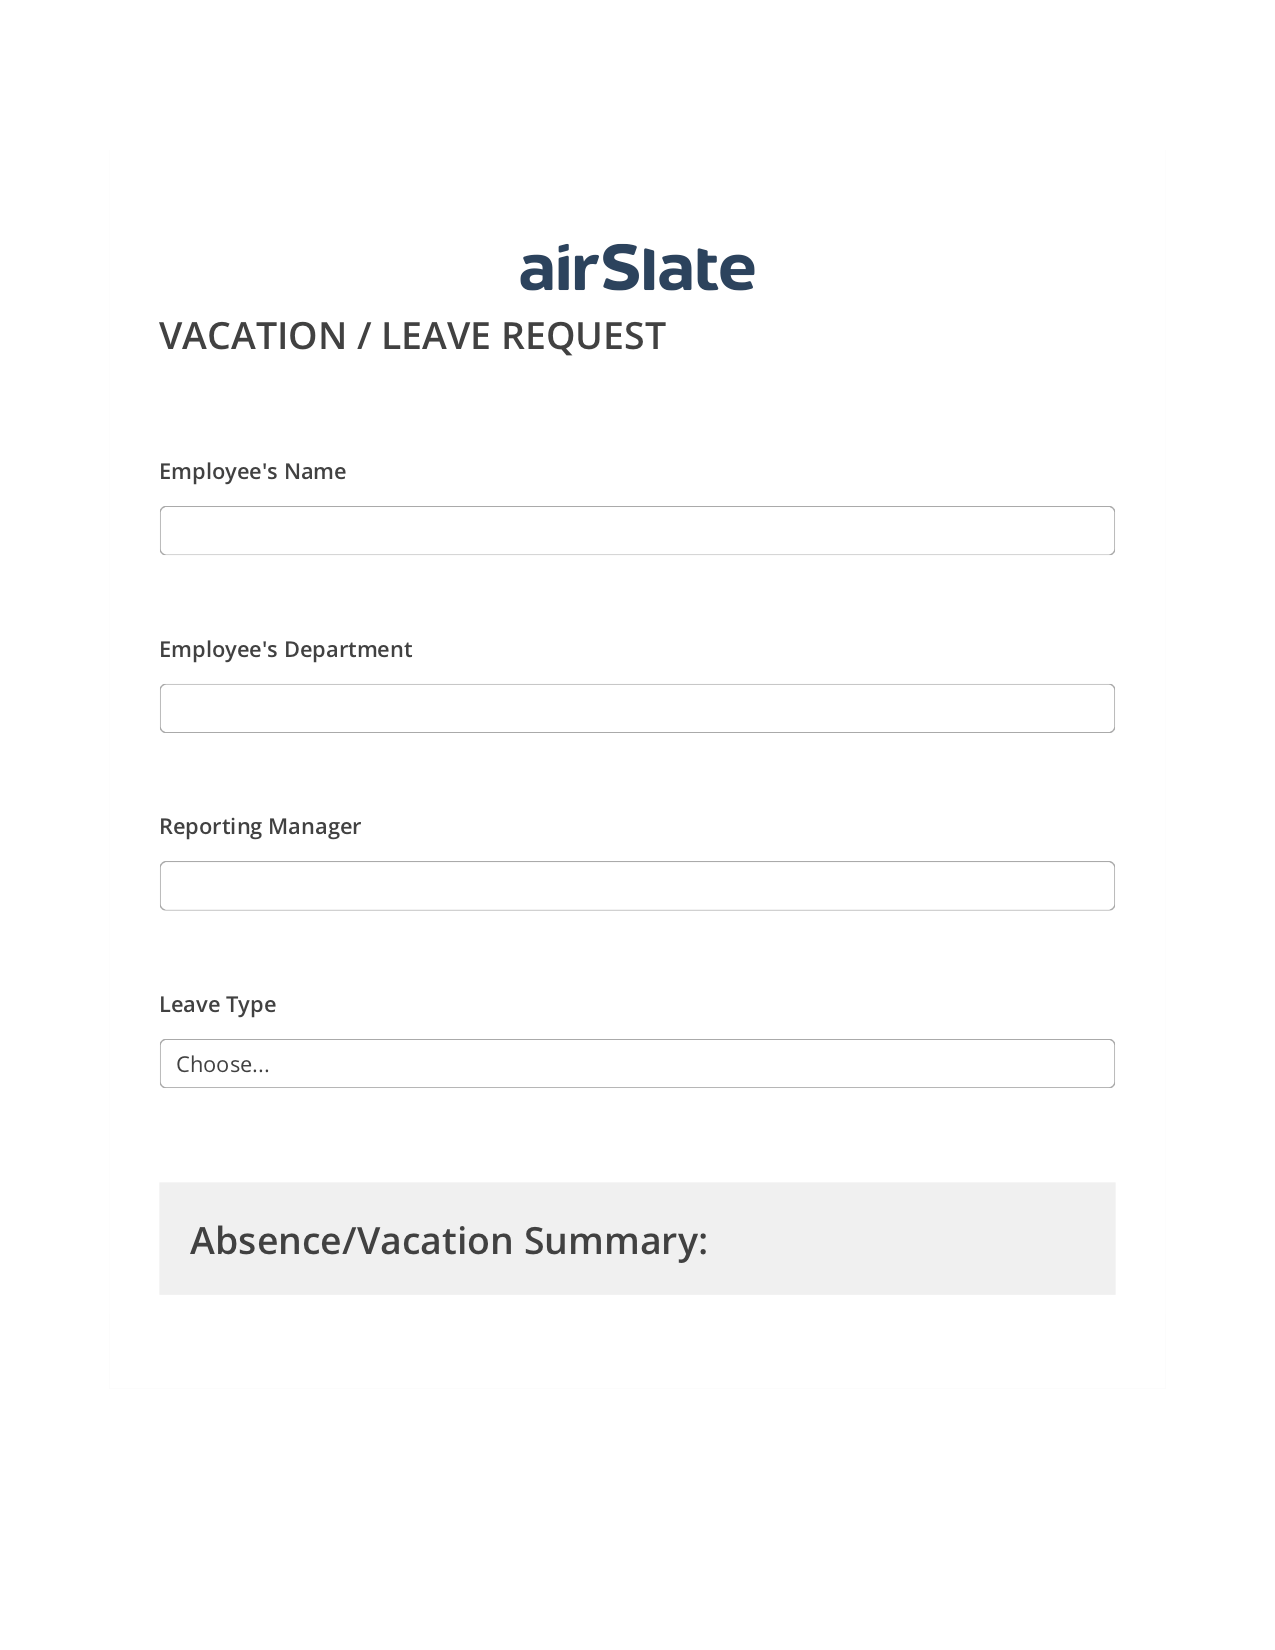 Vacation/Leave Request Workflow Pre-fill from MySQL Bot, Custom Field's Value Bot, Export to Smartsheet